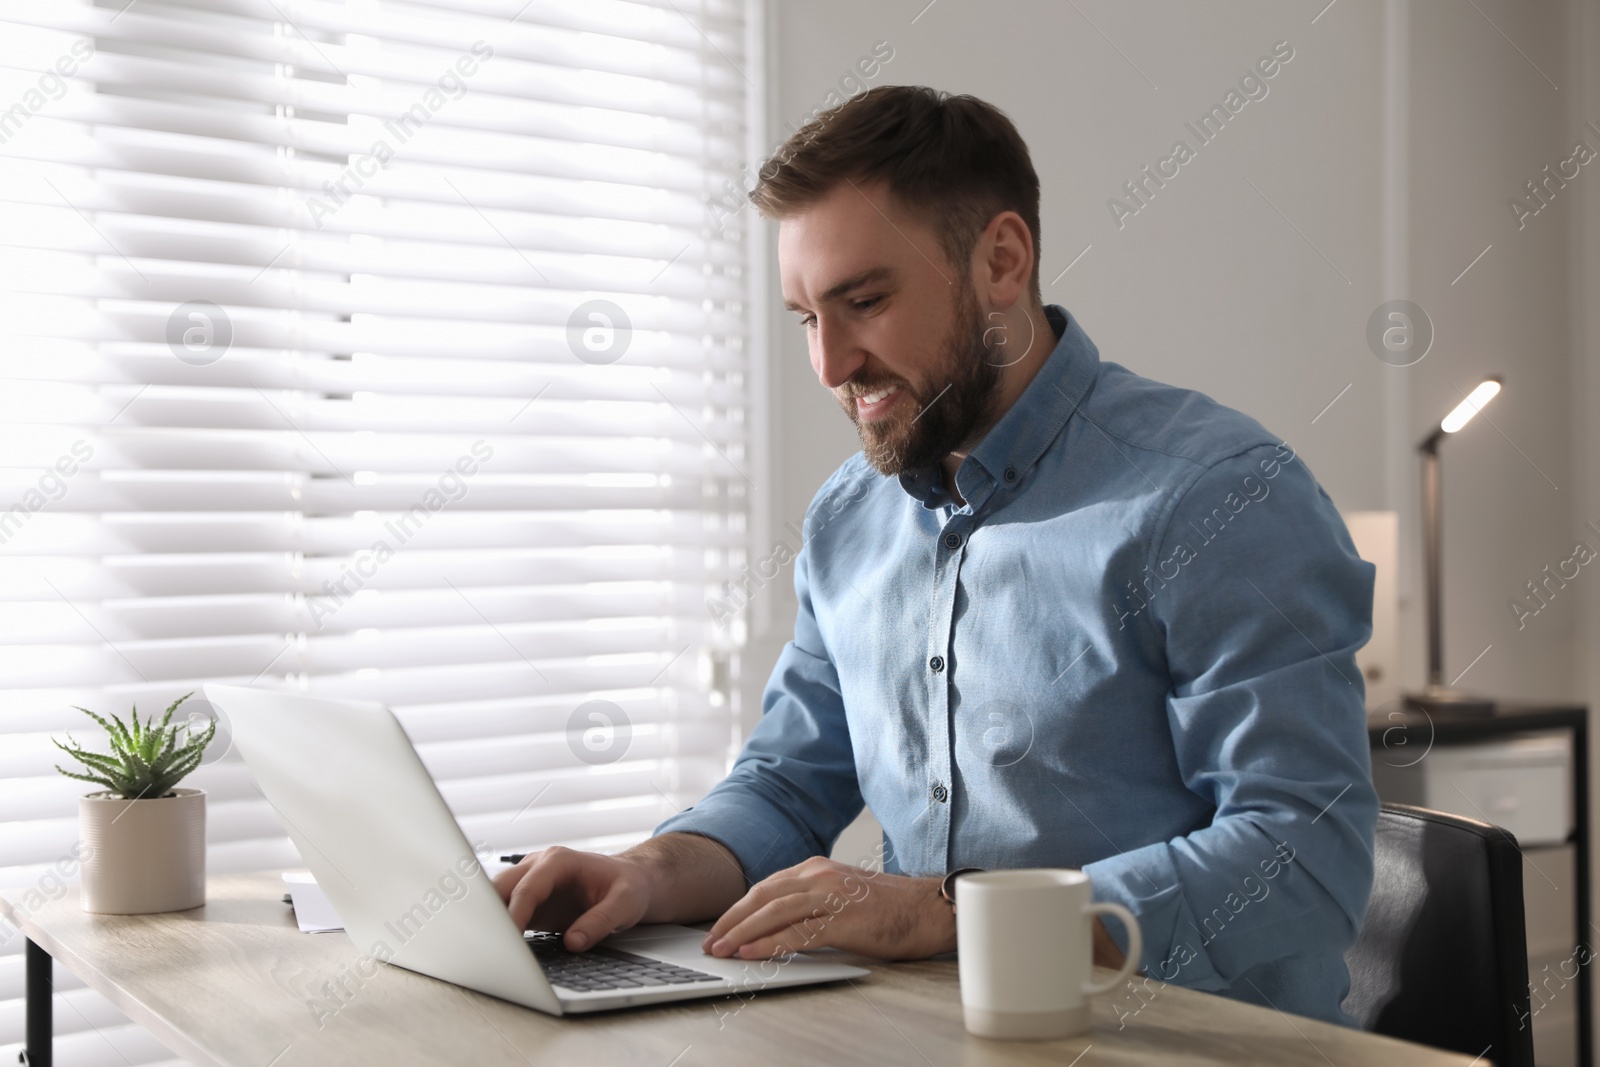 Photo of Young man working on laptop at table in office